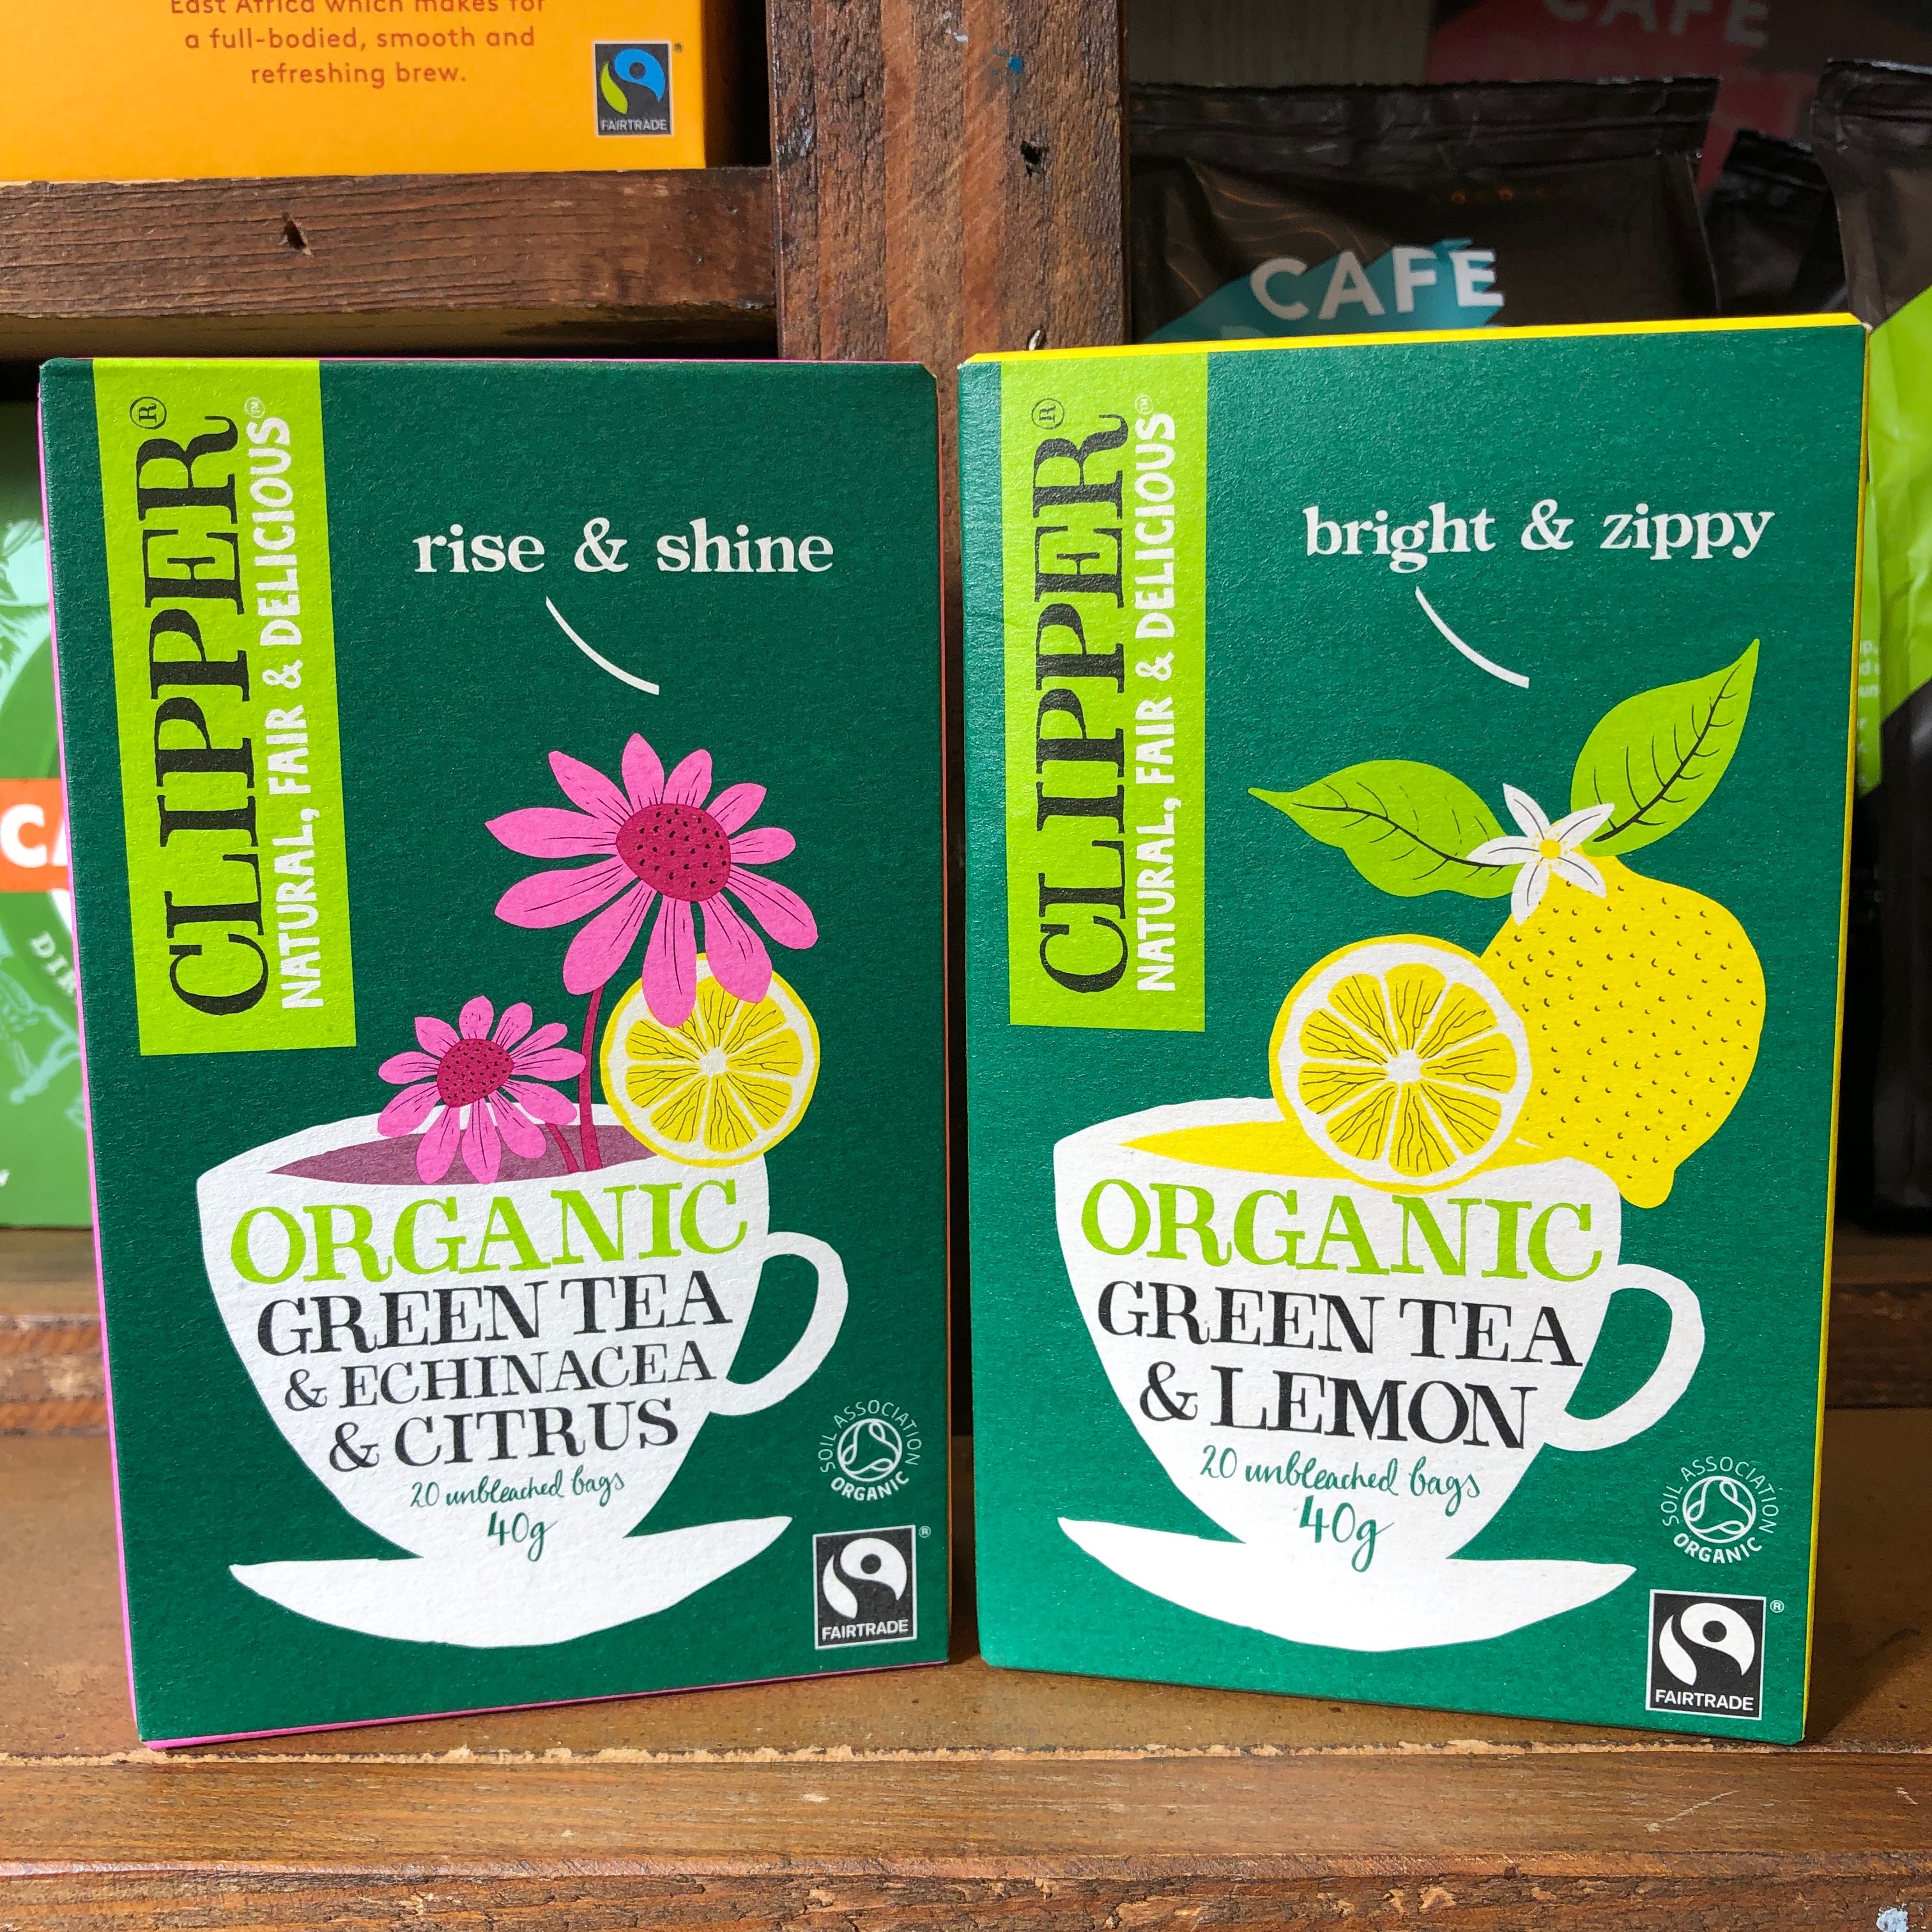 Clipper boxes of green teas